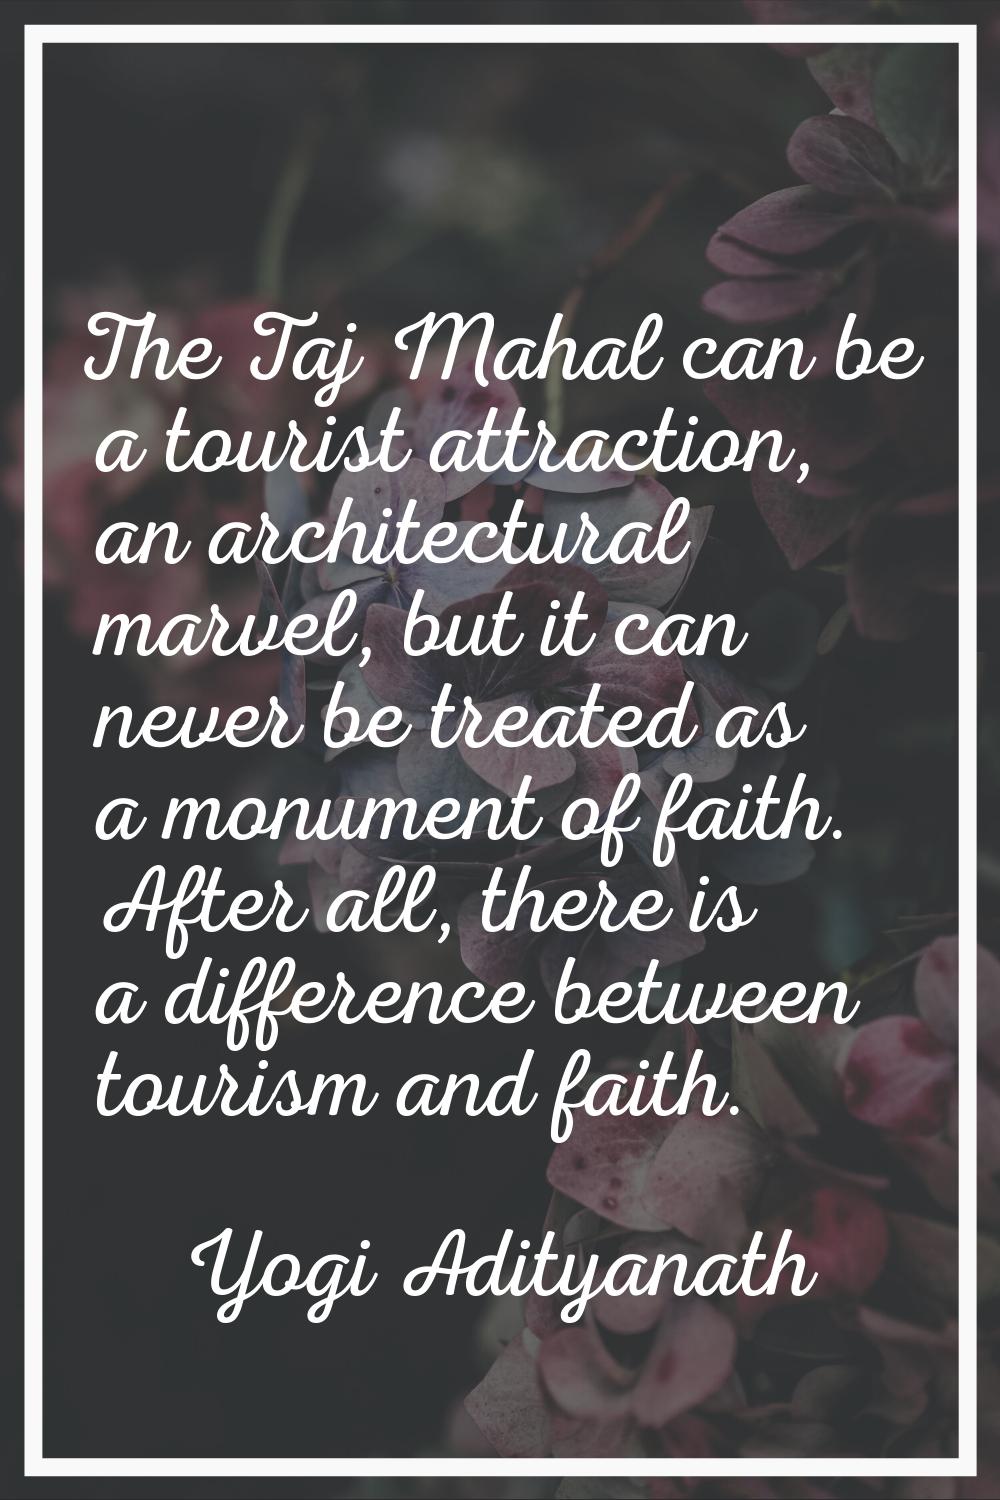 The Taj Mahal can be a tourist attraction, an architectural marvel, but it can never be treated as 